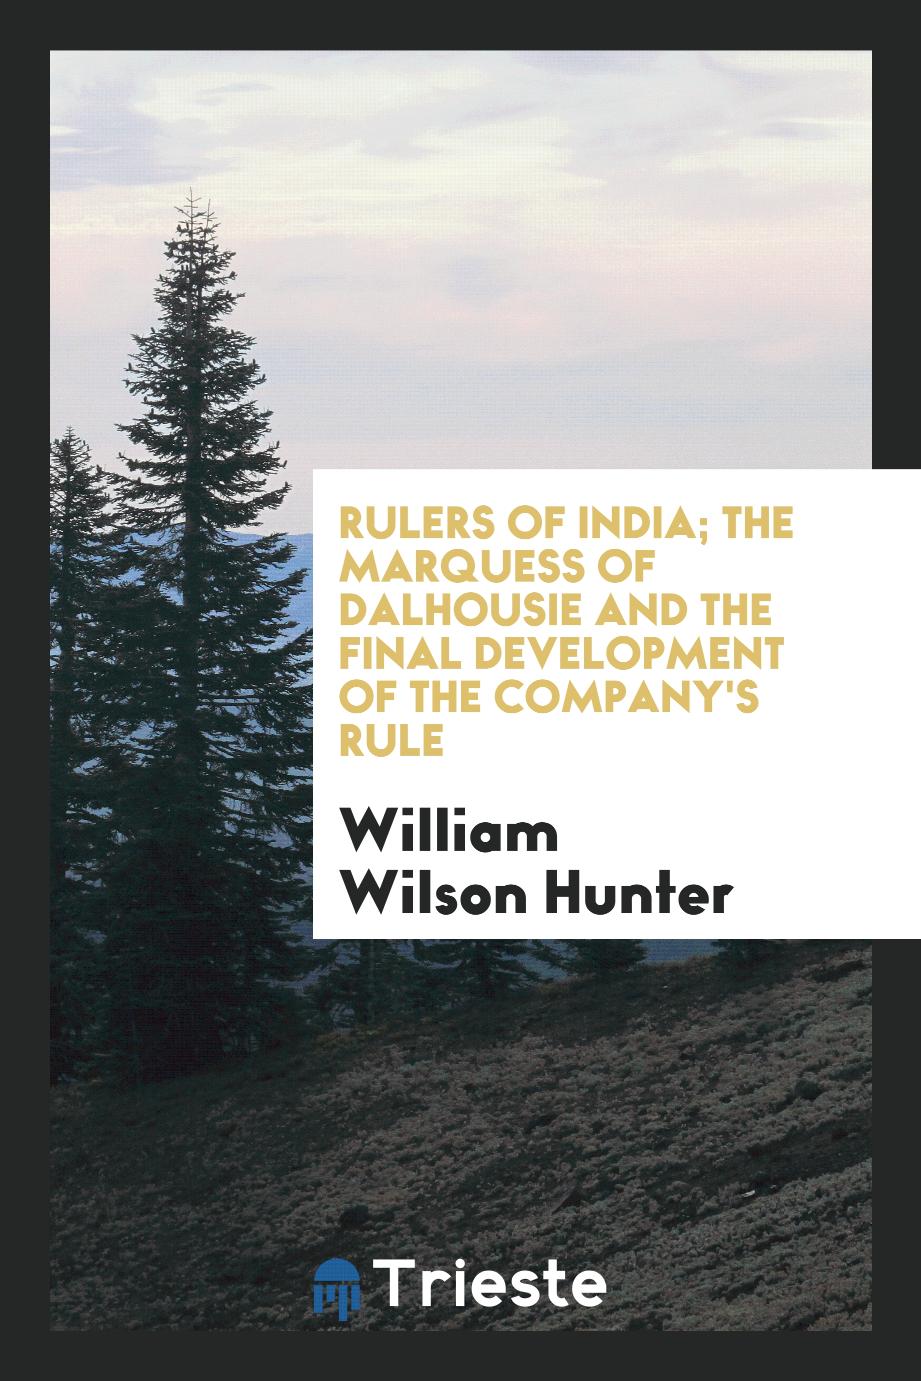 William Wilson Hunter - Rulers of India; The Marquess of Dalhousie and the final development of the Company's rule